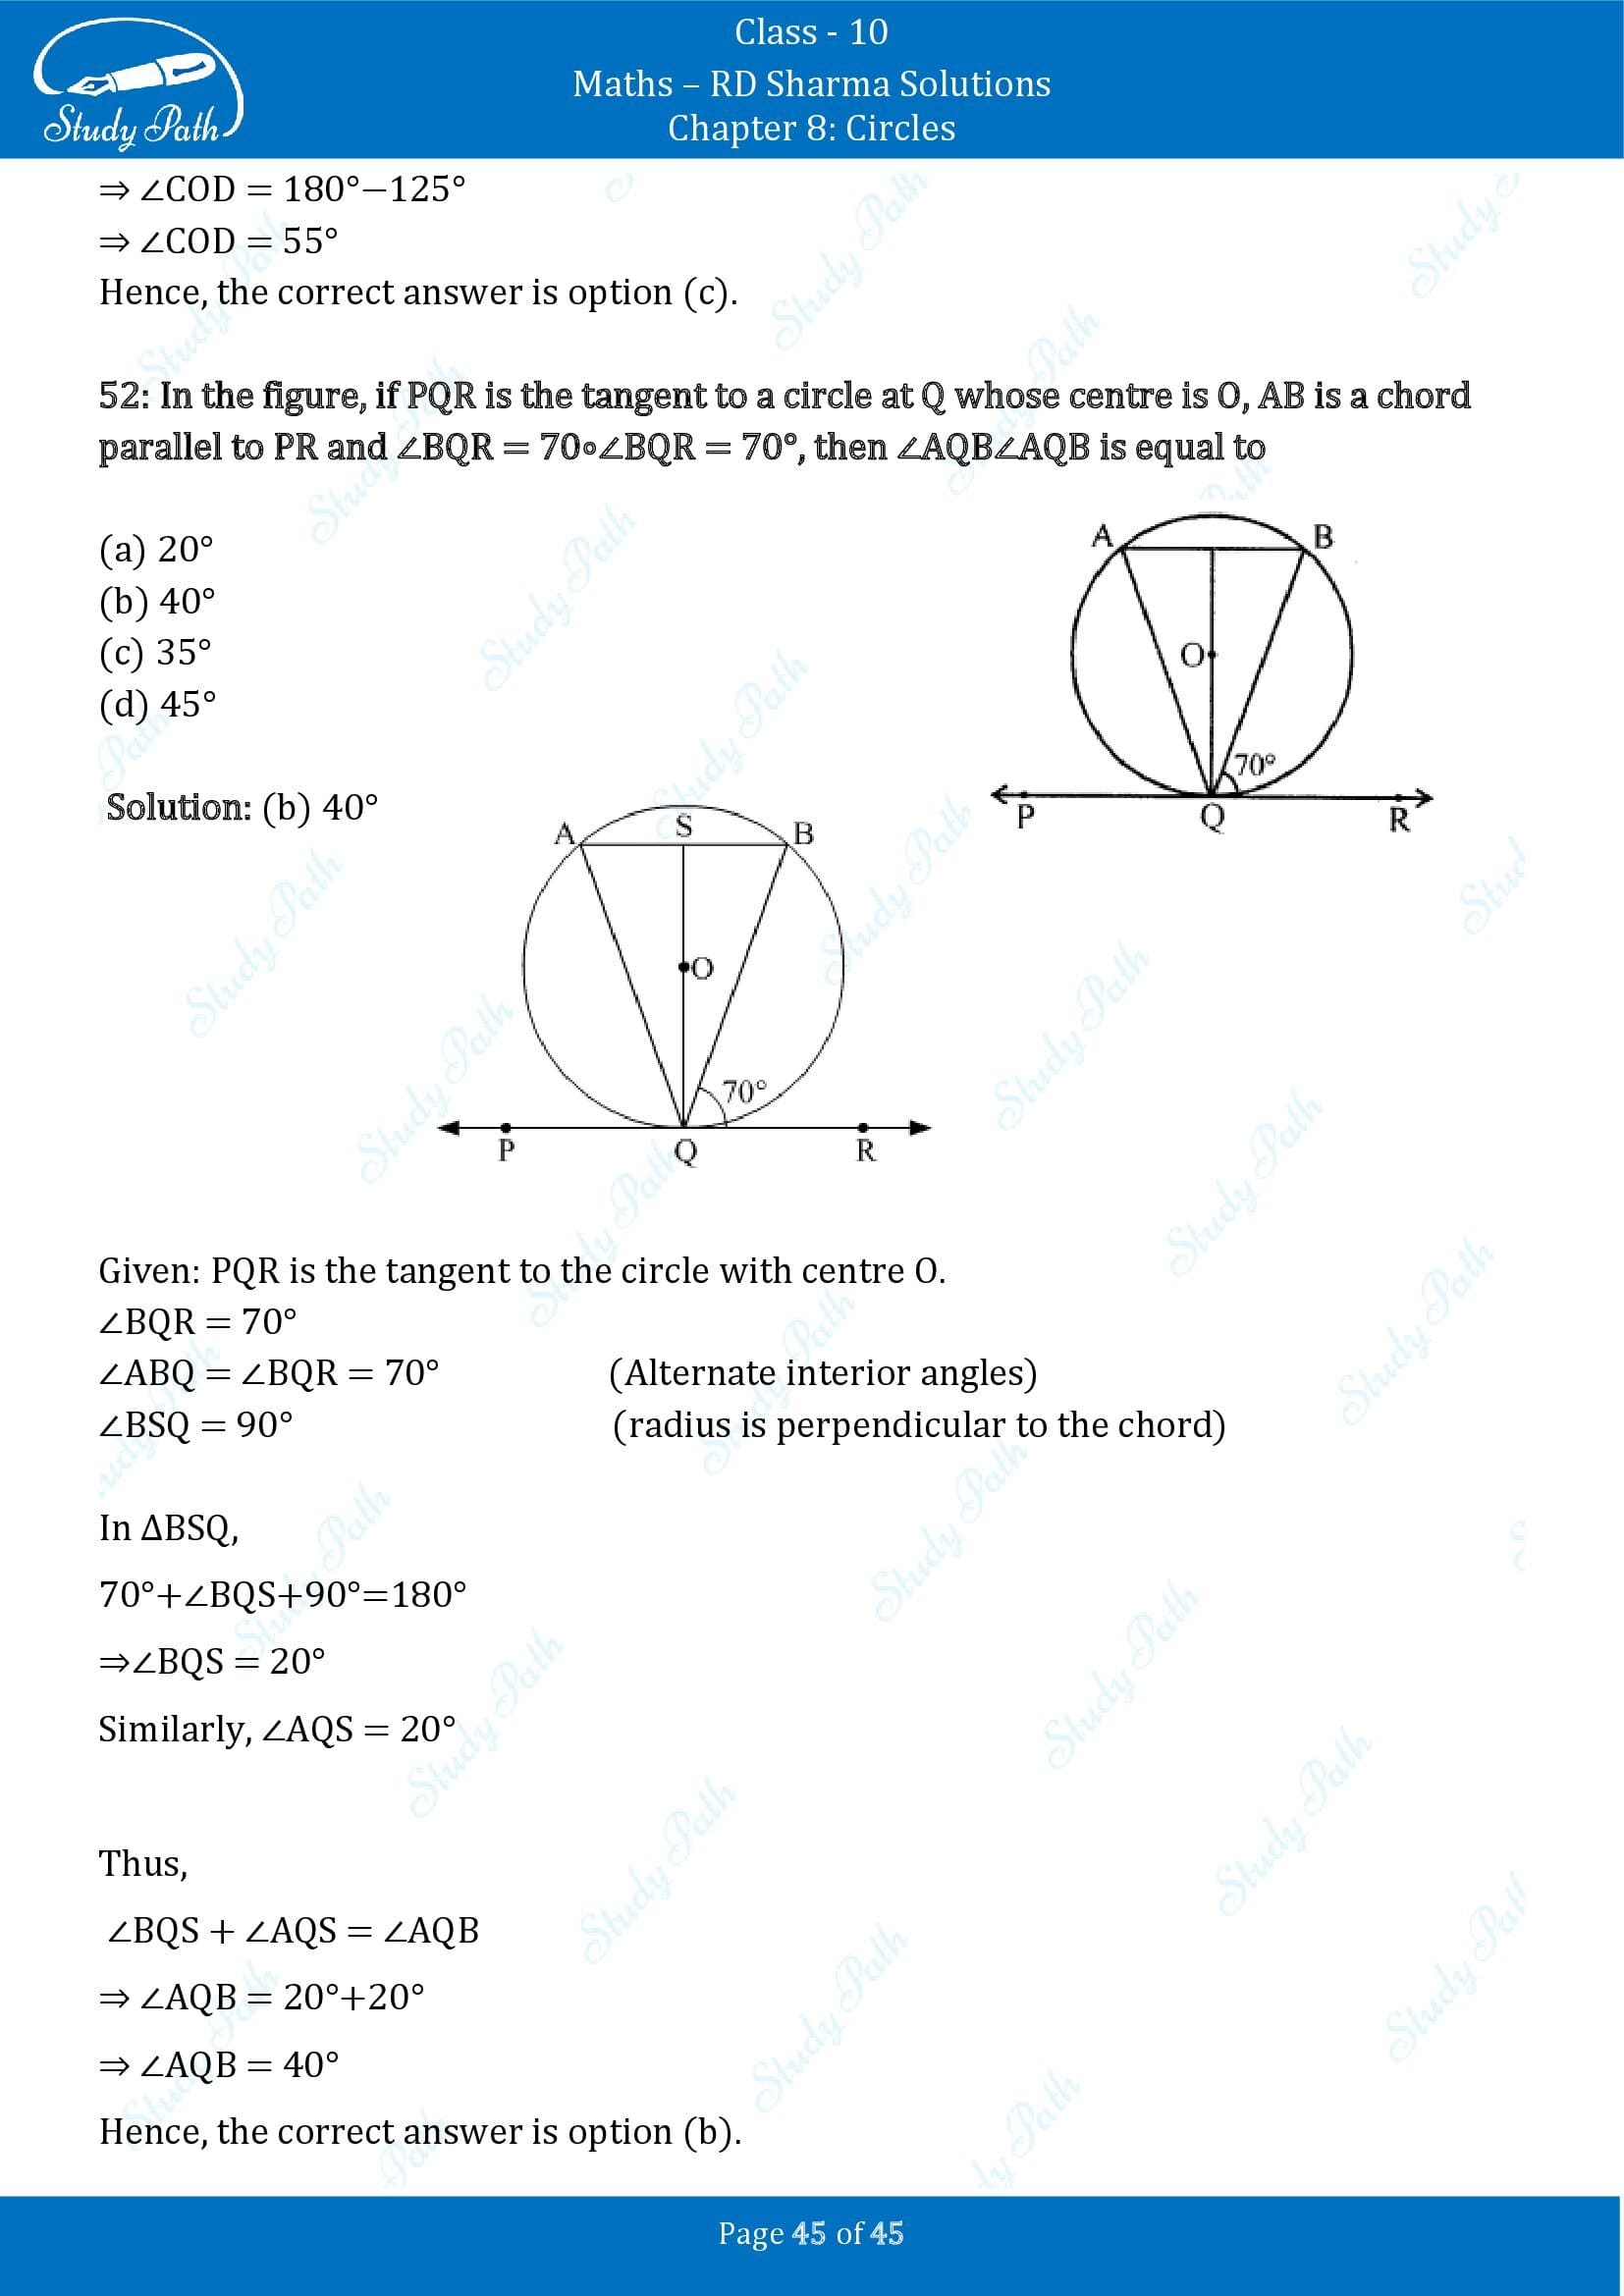 RD Sharma Solutions Class 10 Chapter 8 Circles Multiple Choice Questions MCQs 00045